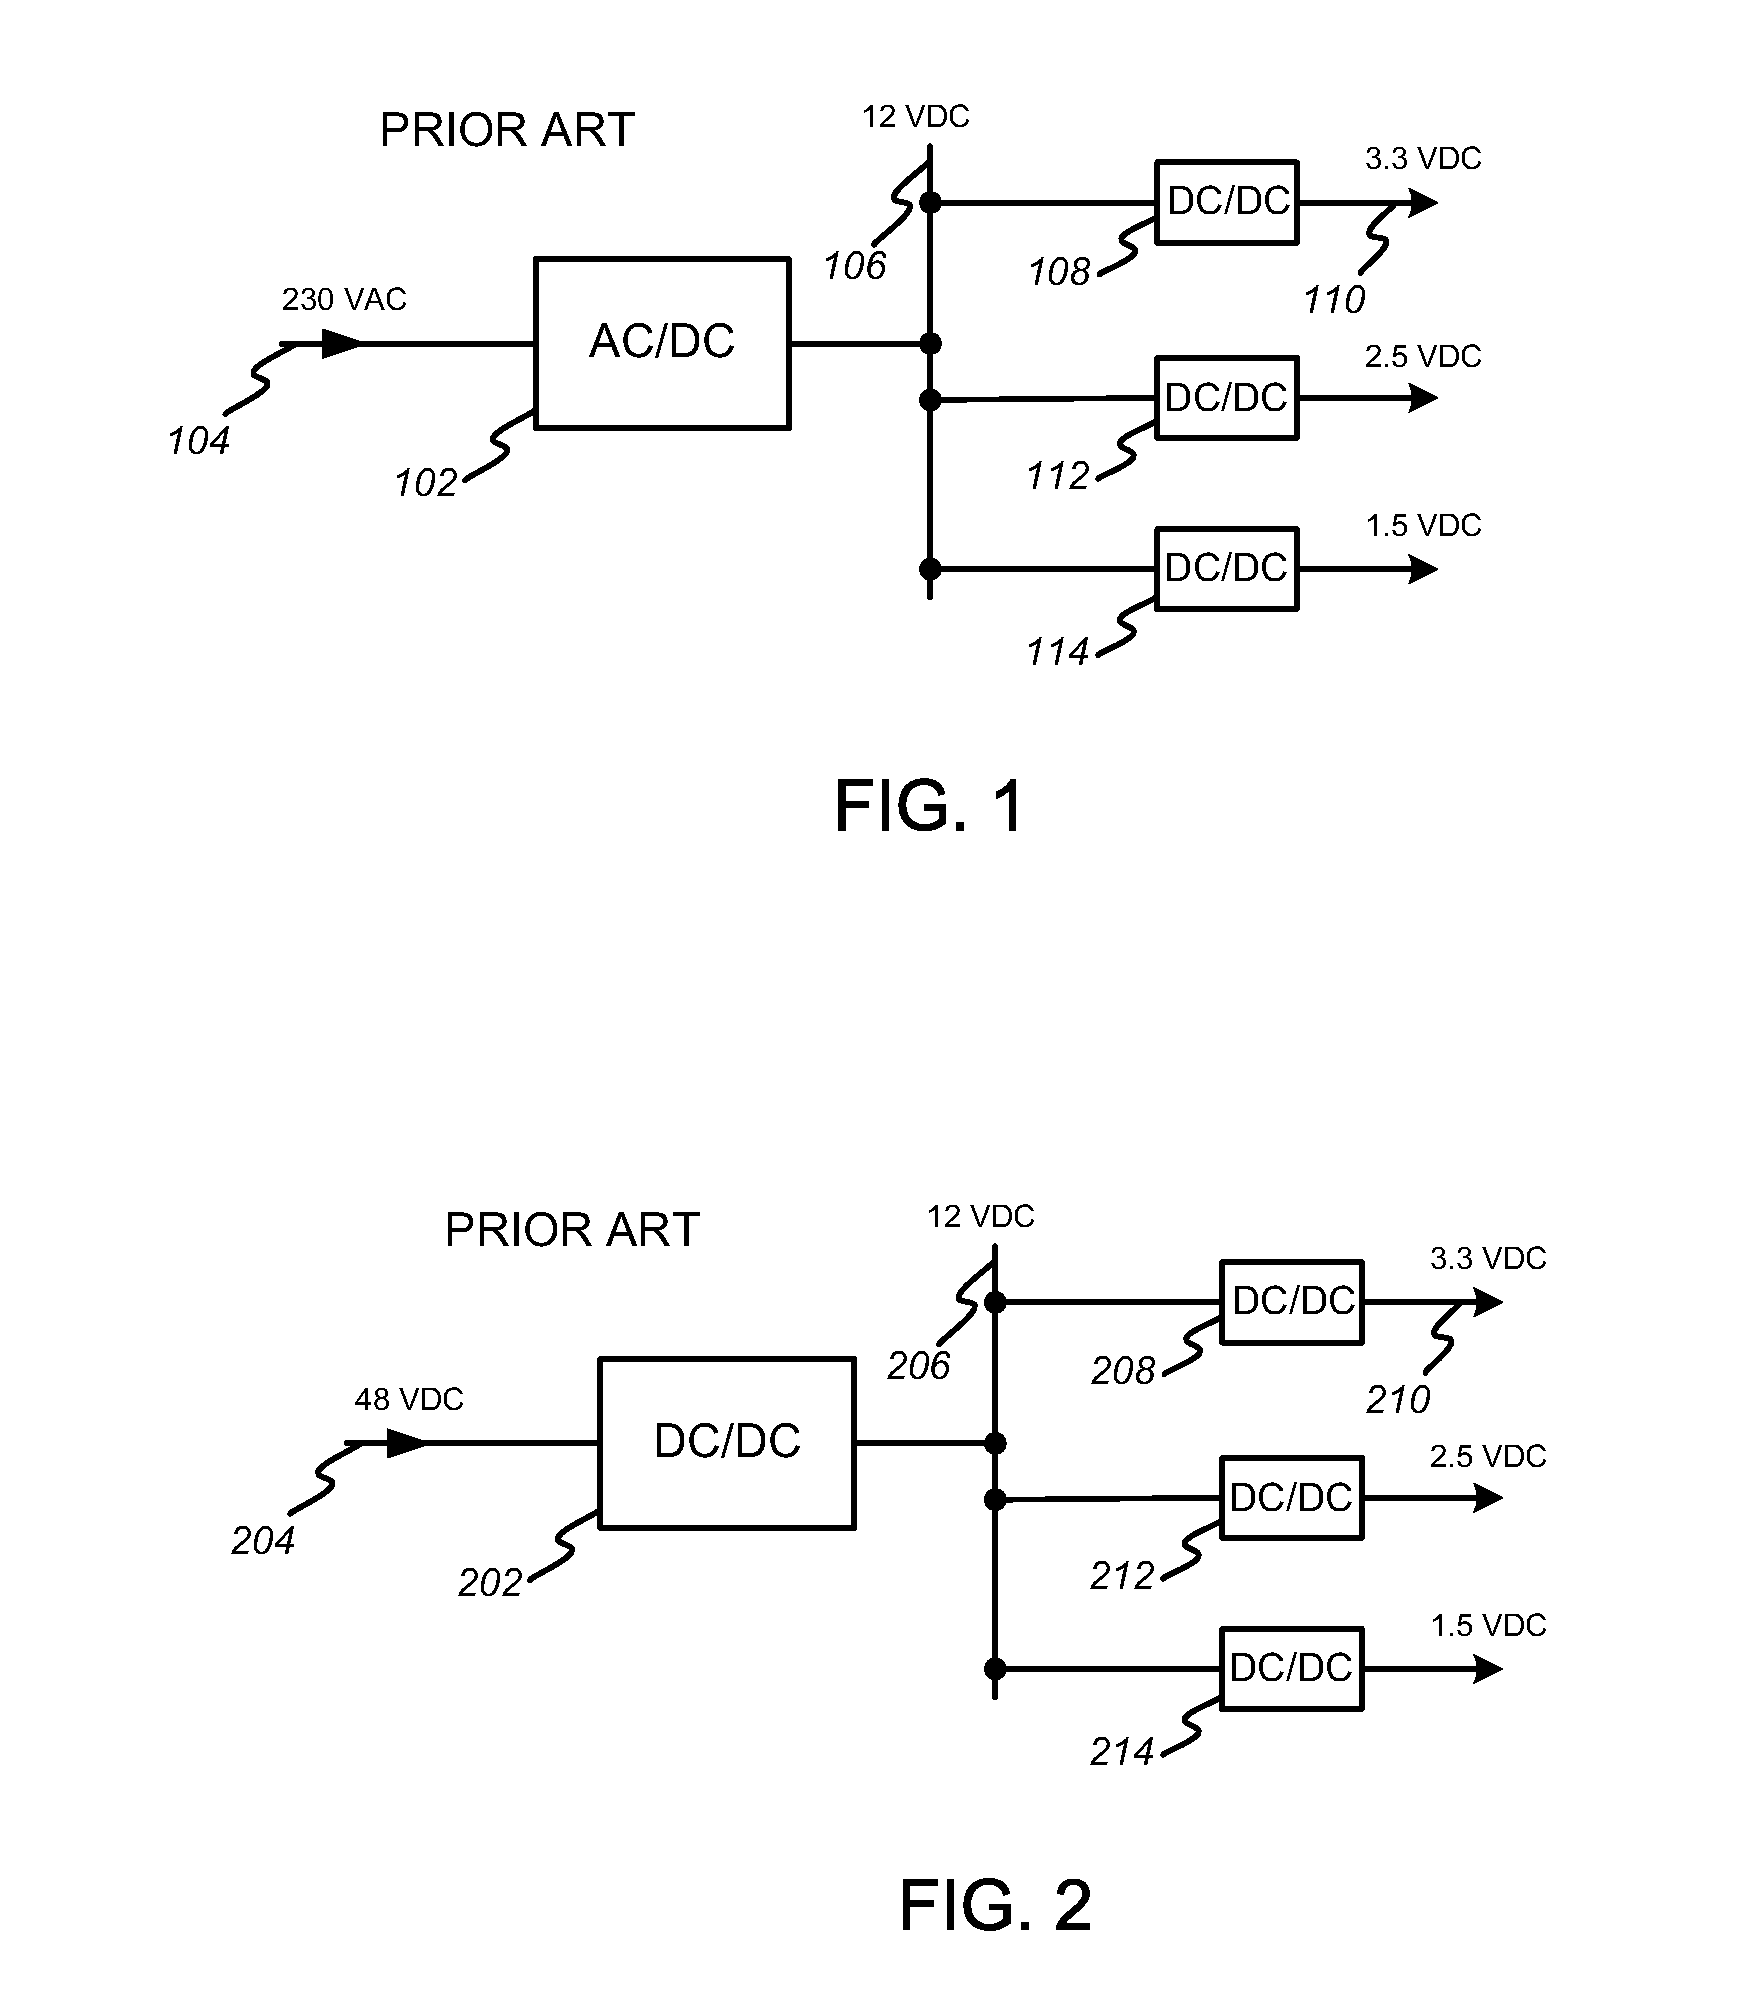 Apparatus and method of optimizing power system efficiency using a power loss model